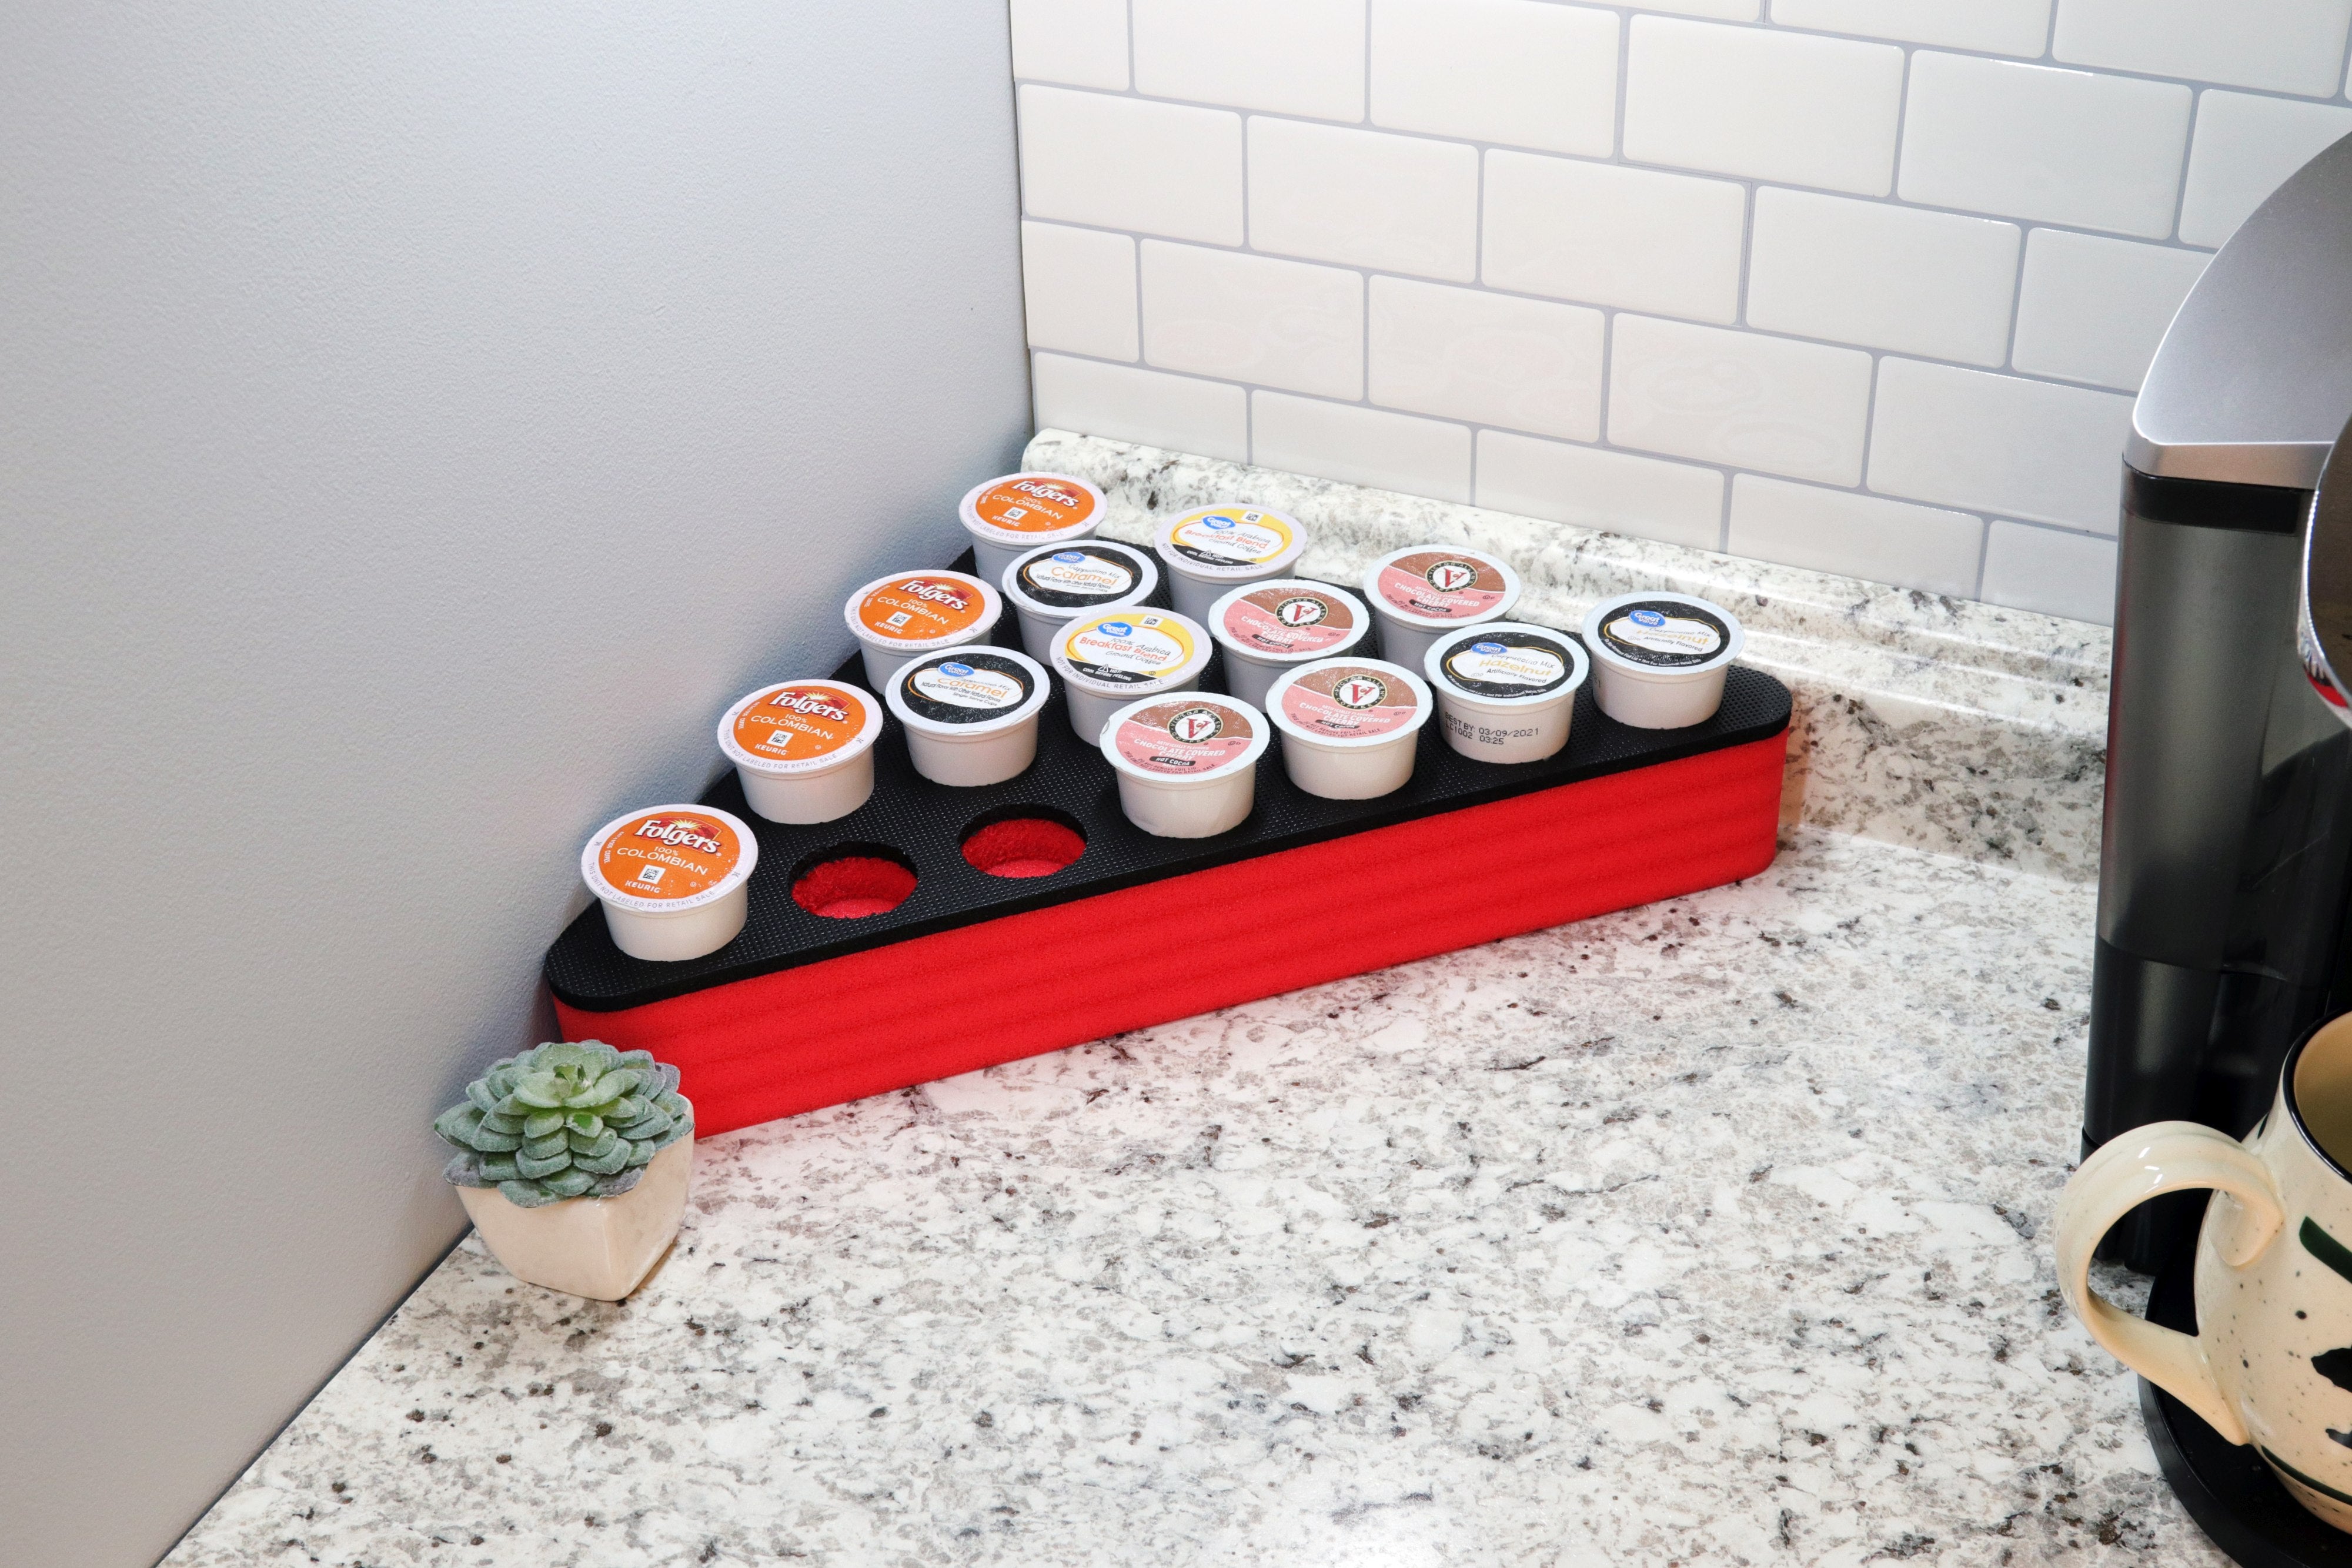 Coffee Corner Red Pod Storage Deluxe Organizer Tray Drawer Insert Washable 11.5 X 11.5 x 15.5 Inches Holds 16 Compatible with Keurig K-Cup